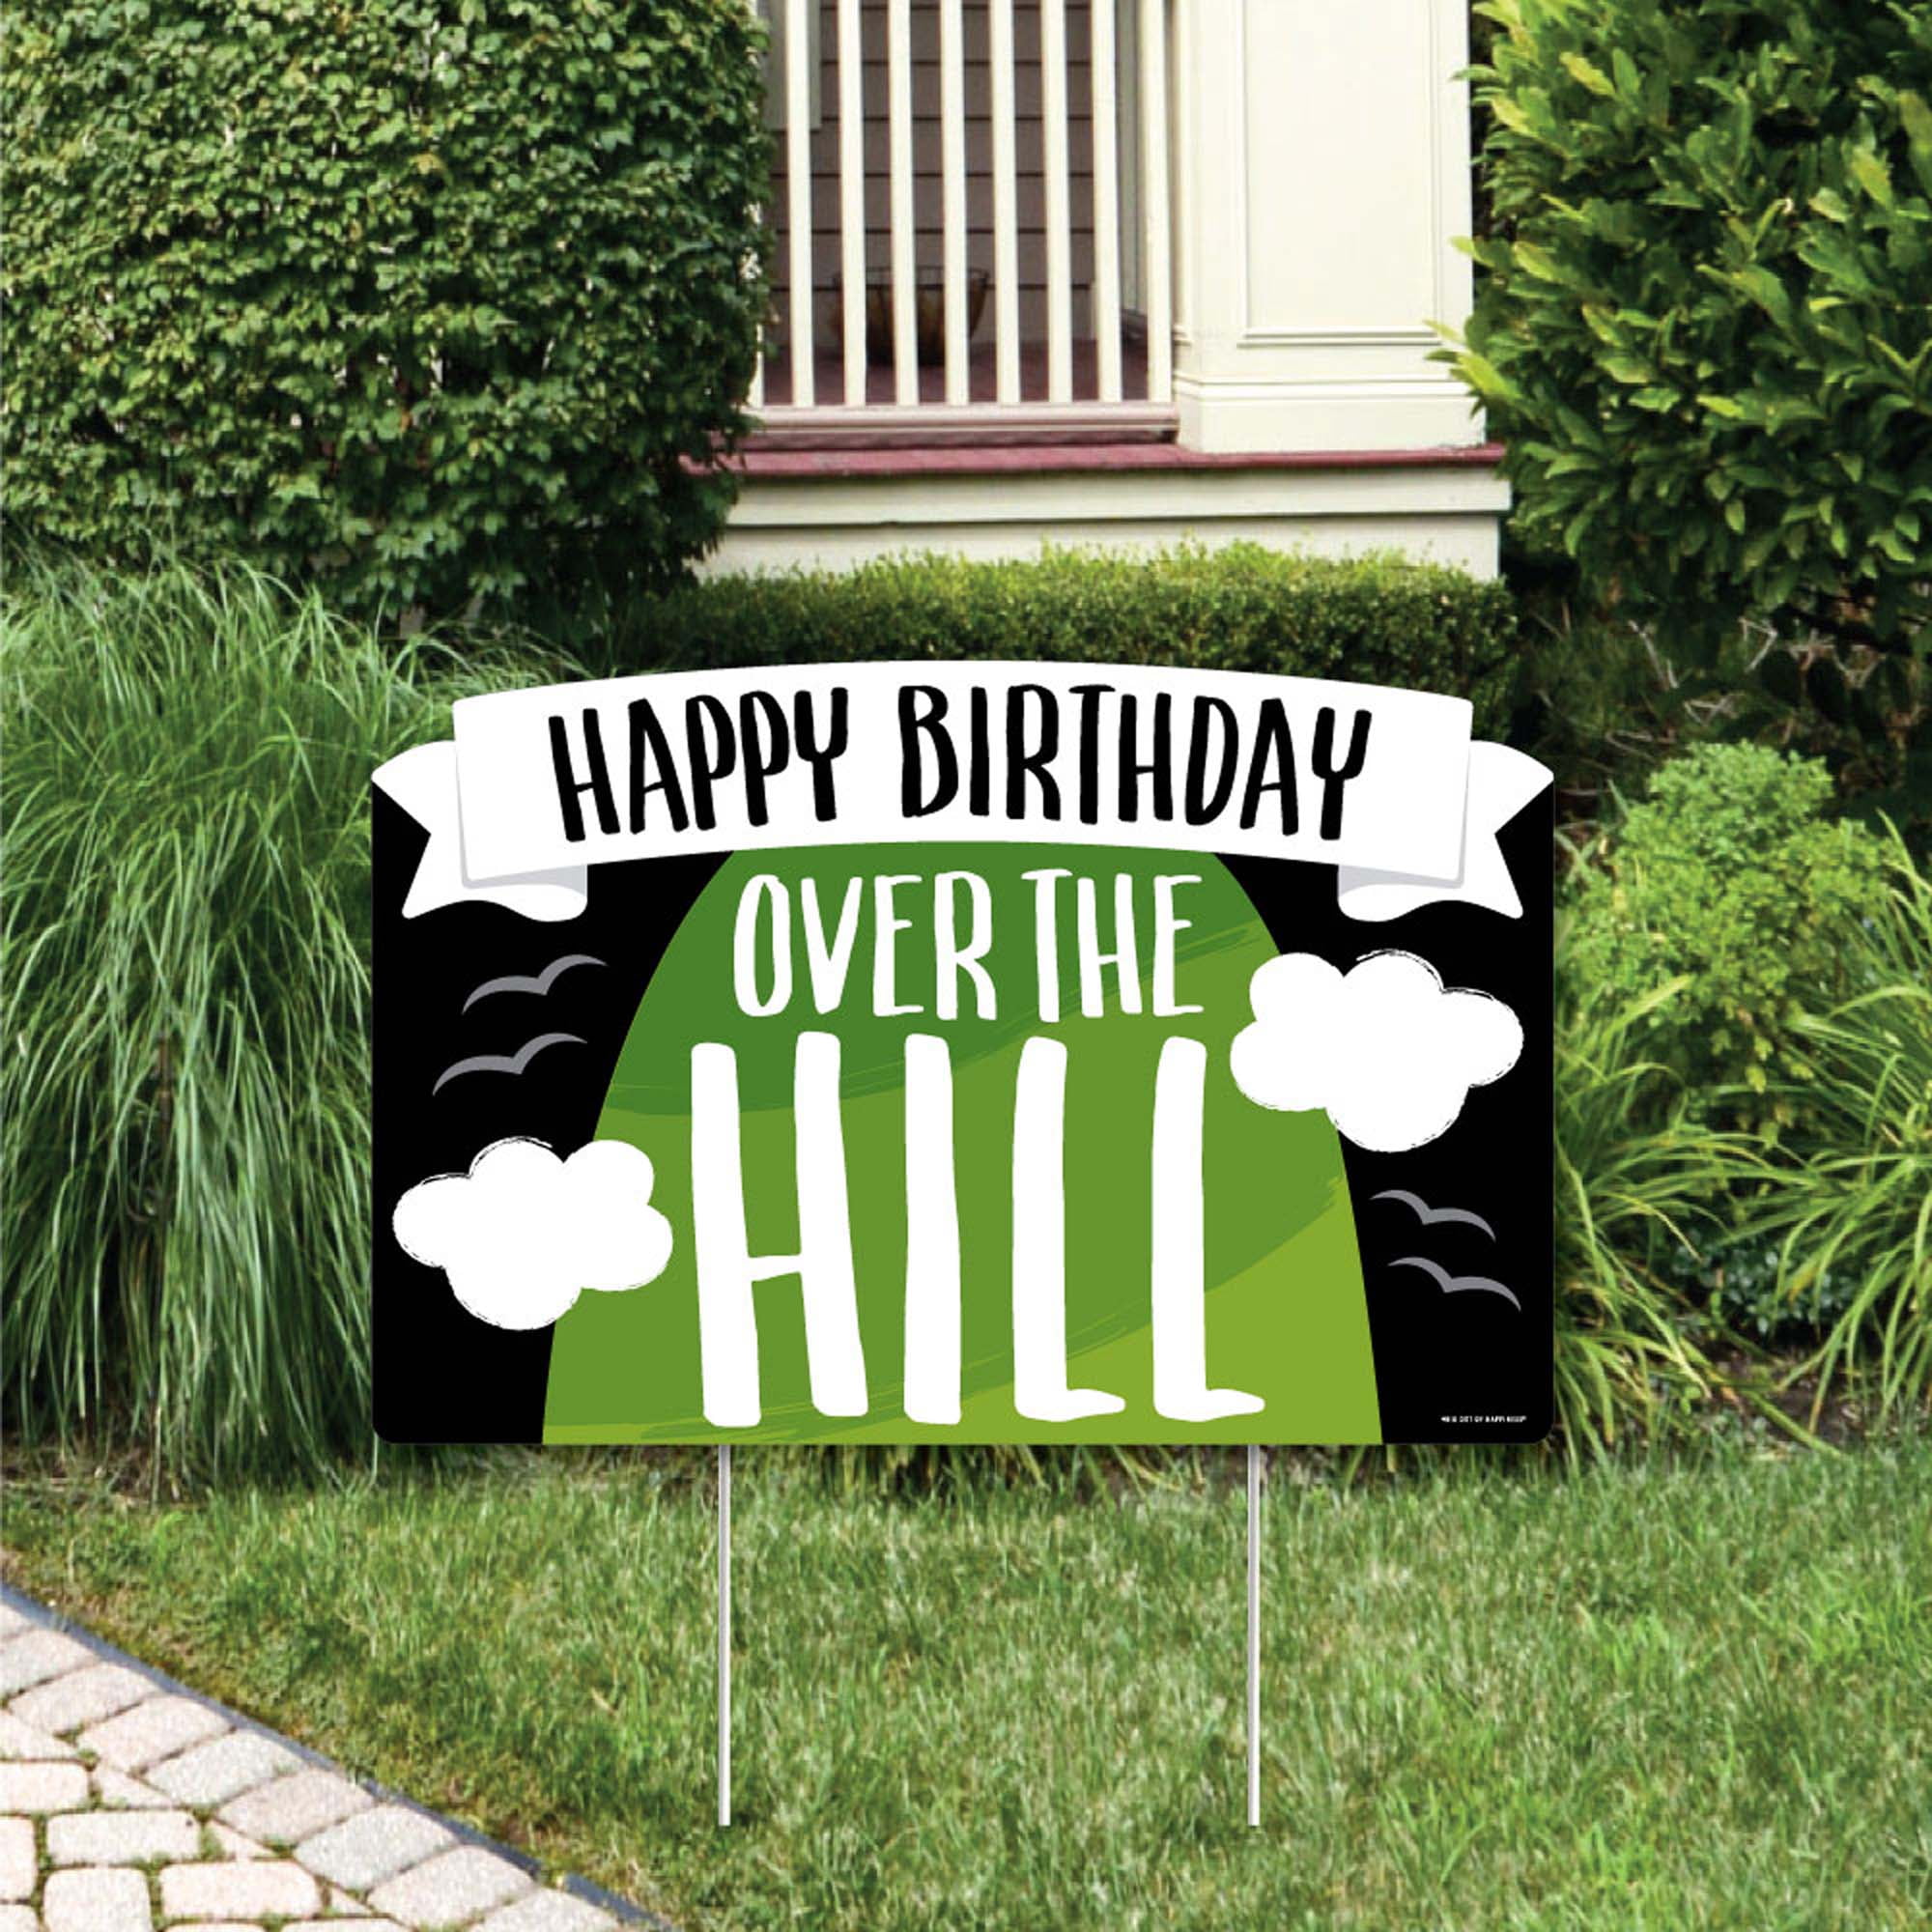 Big Dot of Happiness 1st Birthday Little Mr. Onederful - Party Decorations  - Boy First Birthday Party Welcome Yard Sign